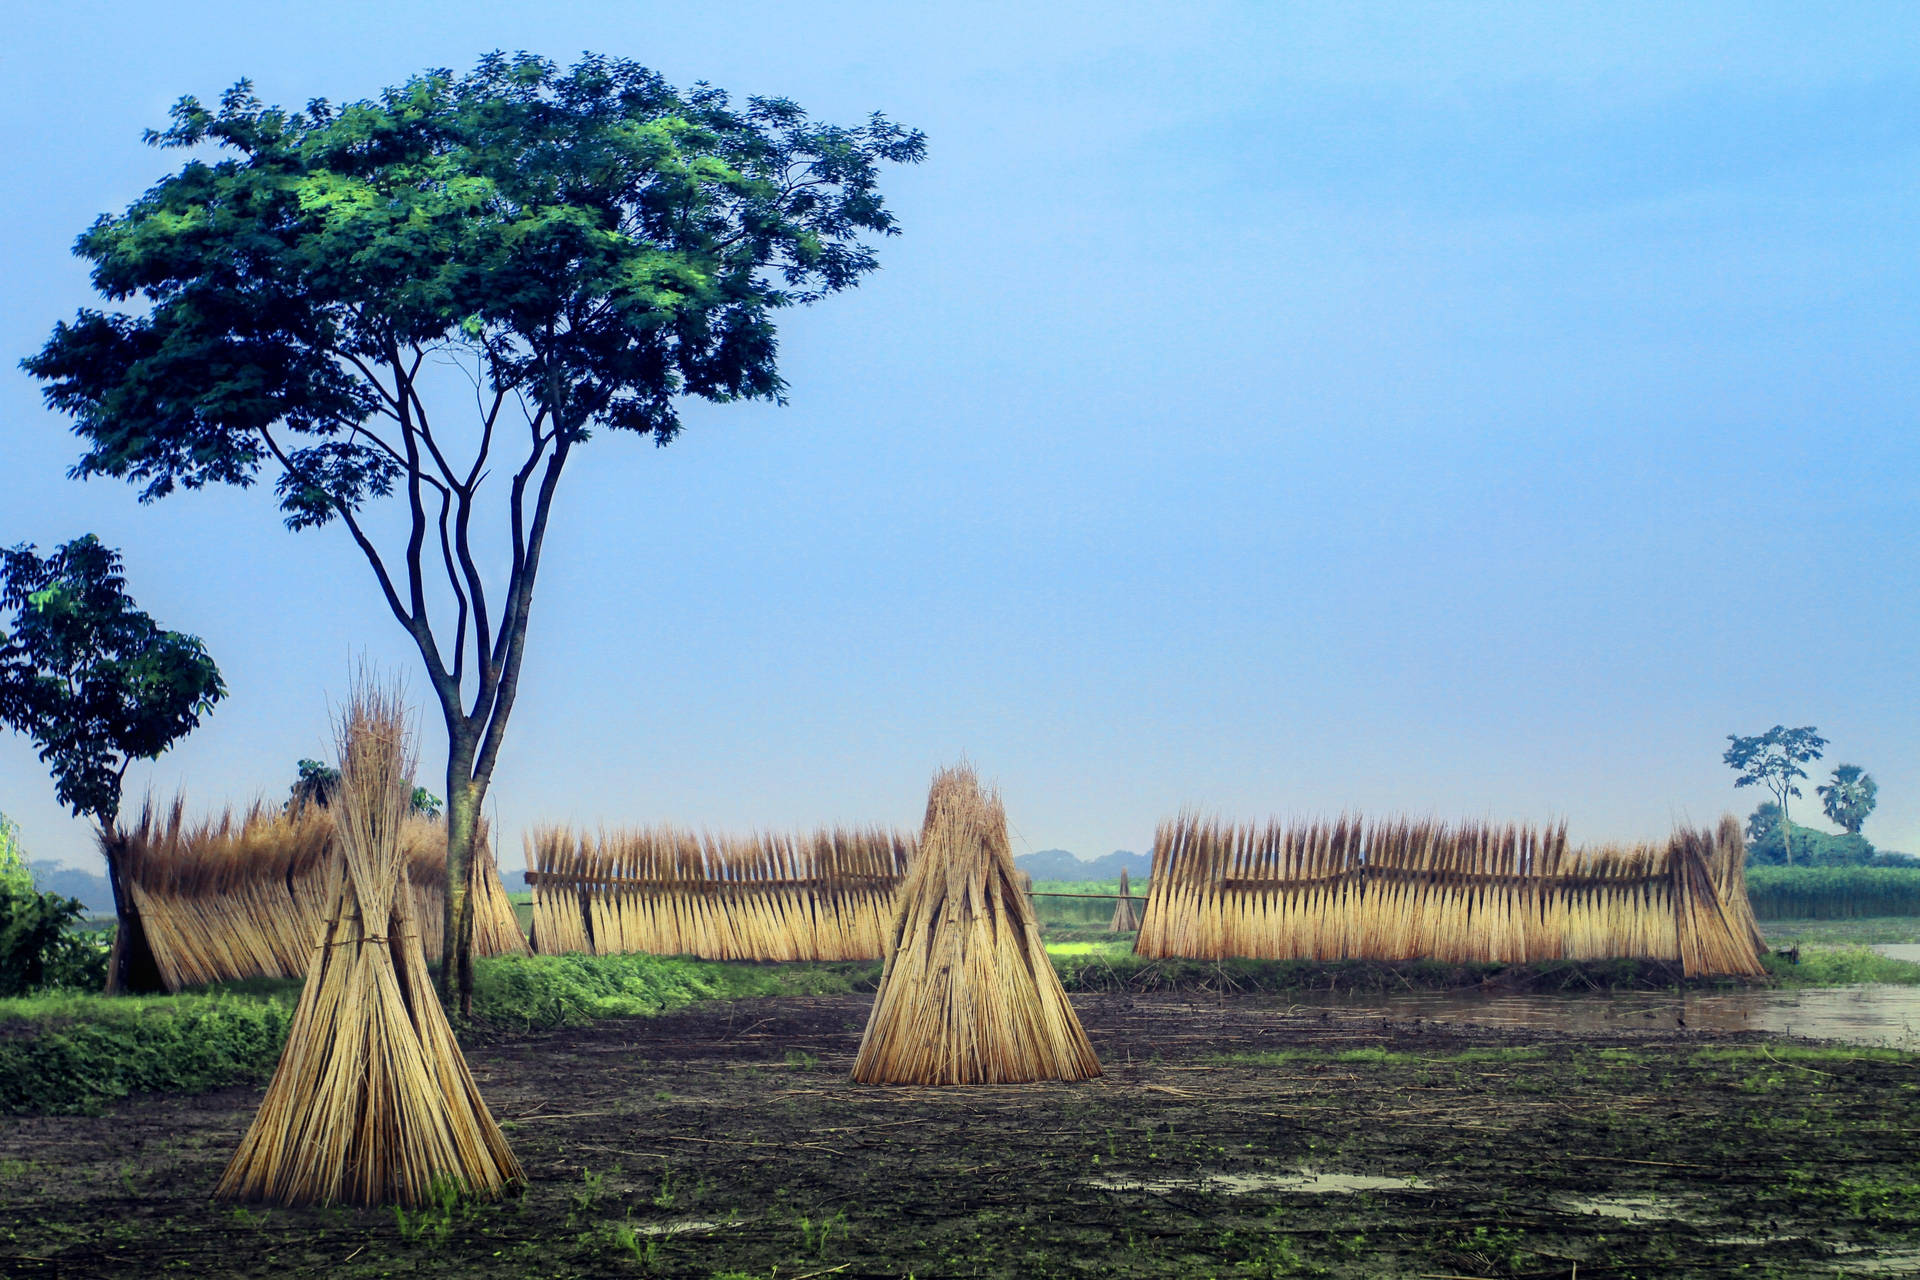 Jute Farming In The Heartland Of Africa Background